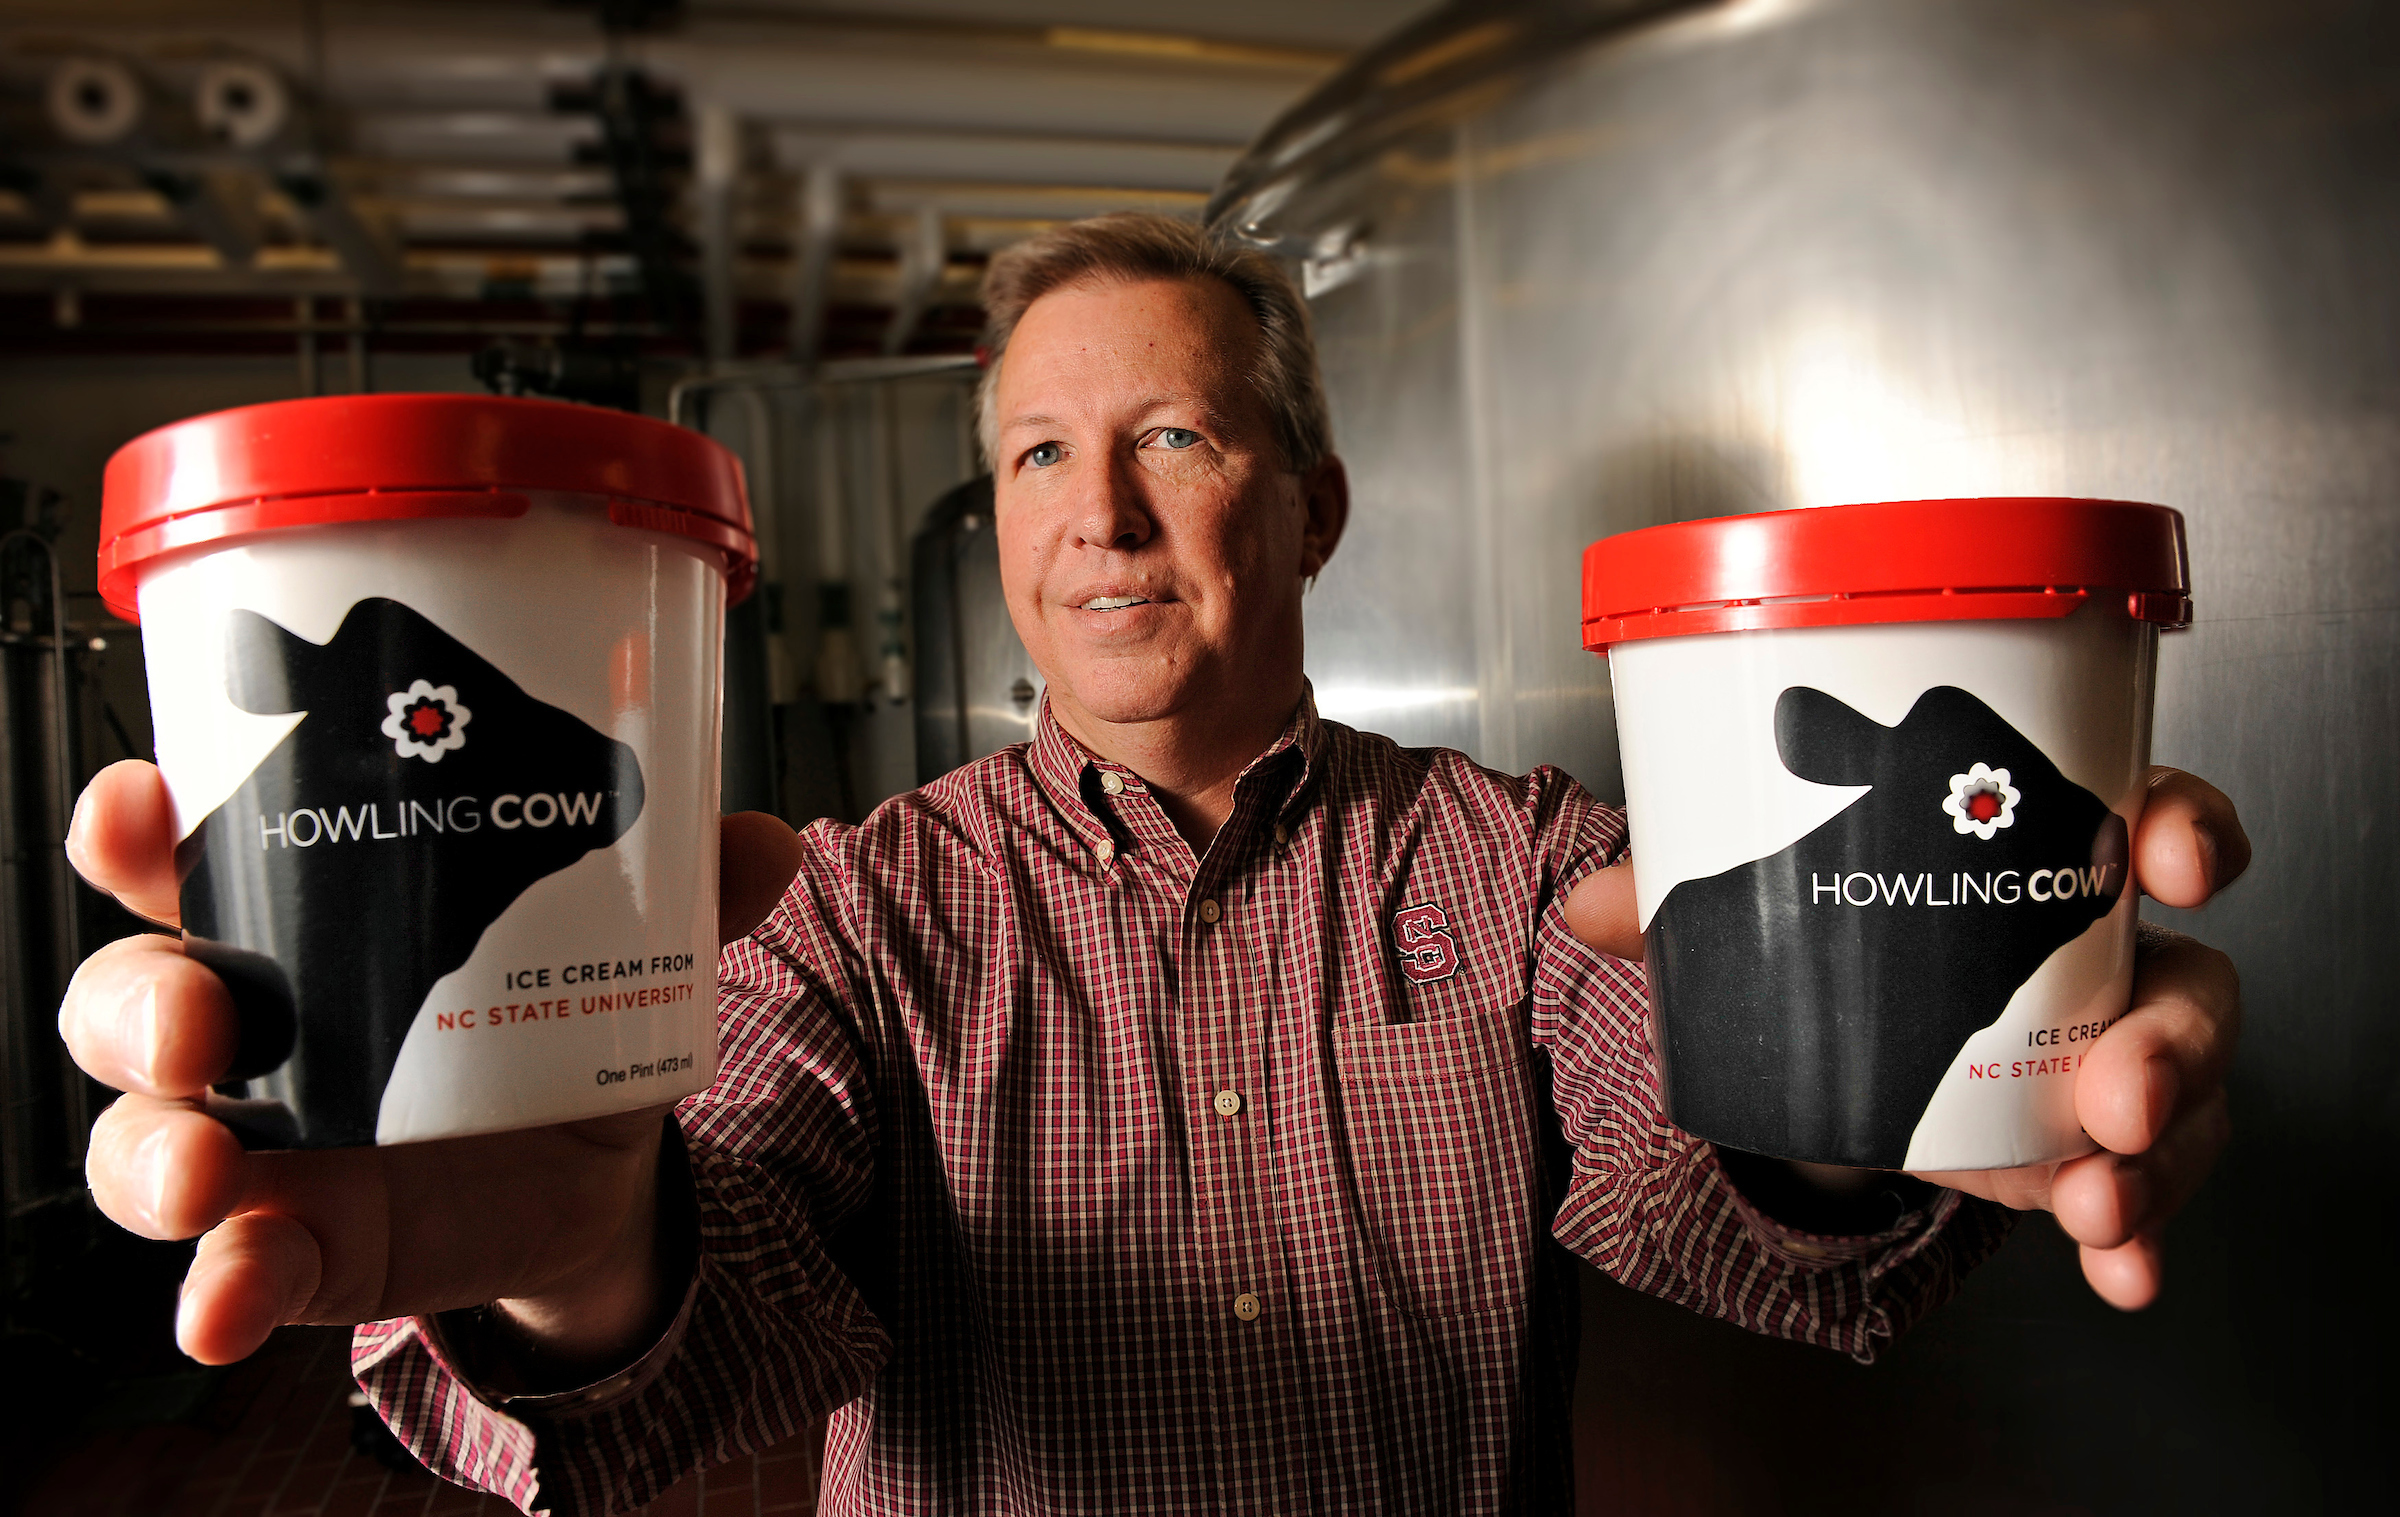 Howling Cow ice cream_Gary Carthwright_NC State